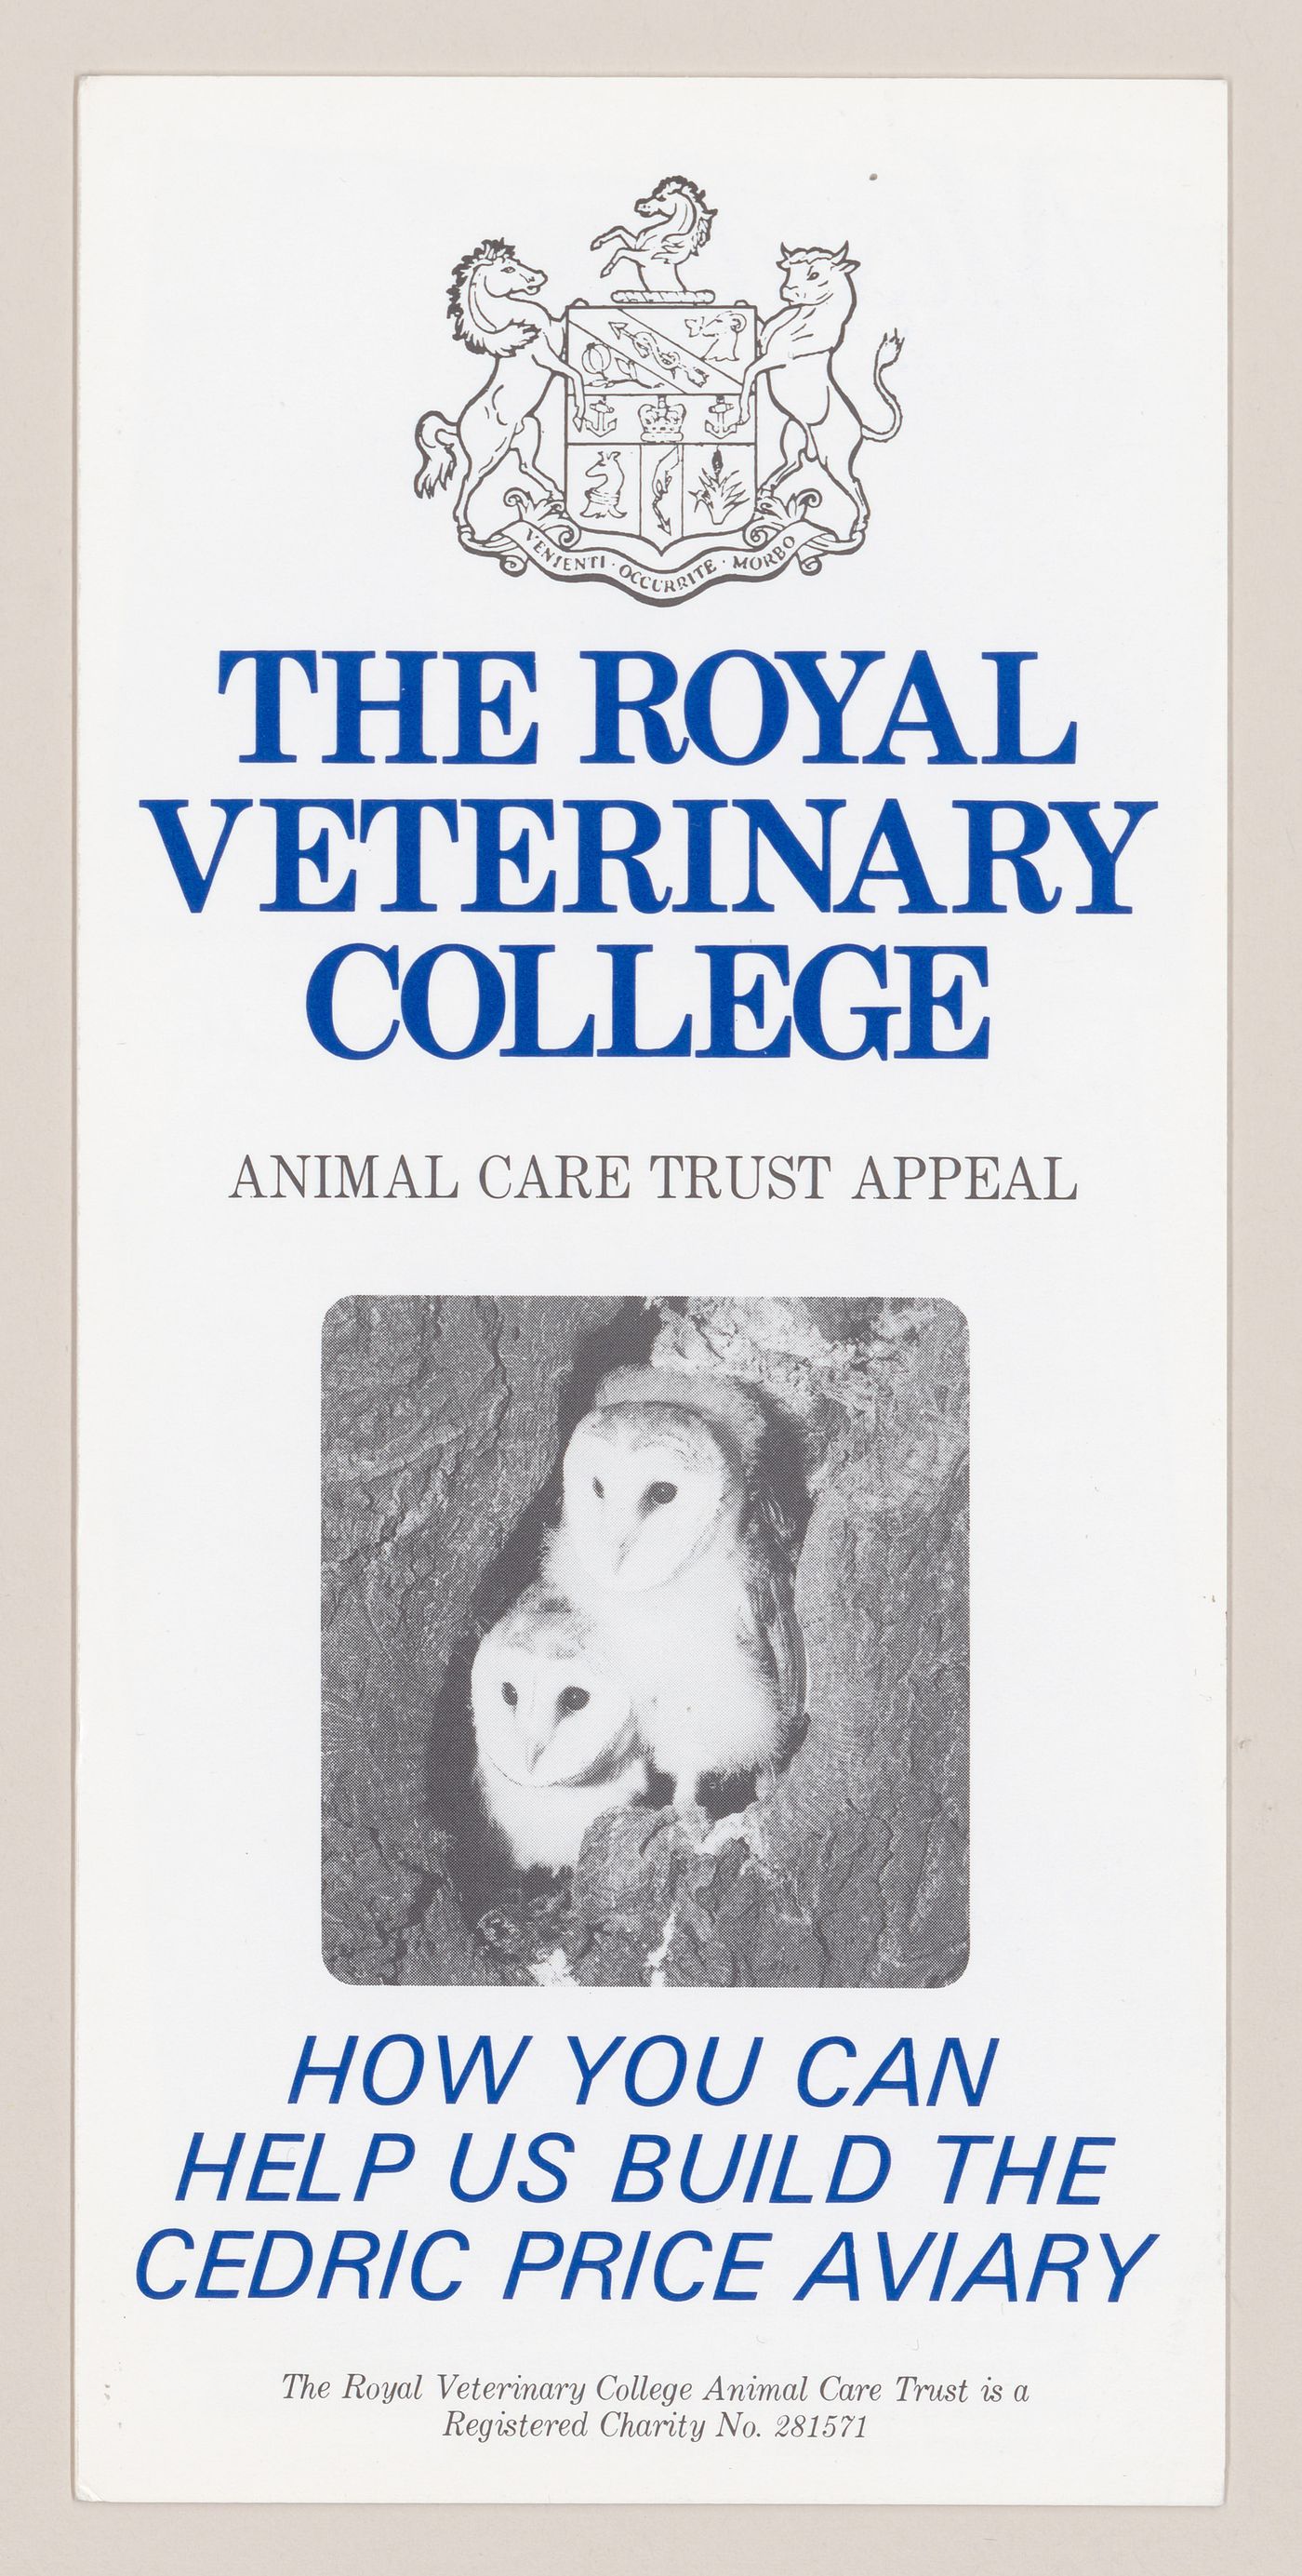 Fundraising brochure "How you can help us build the Cedric Price Aviary" from The Royal veterinary college